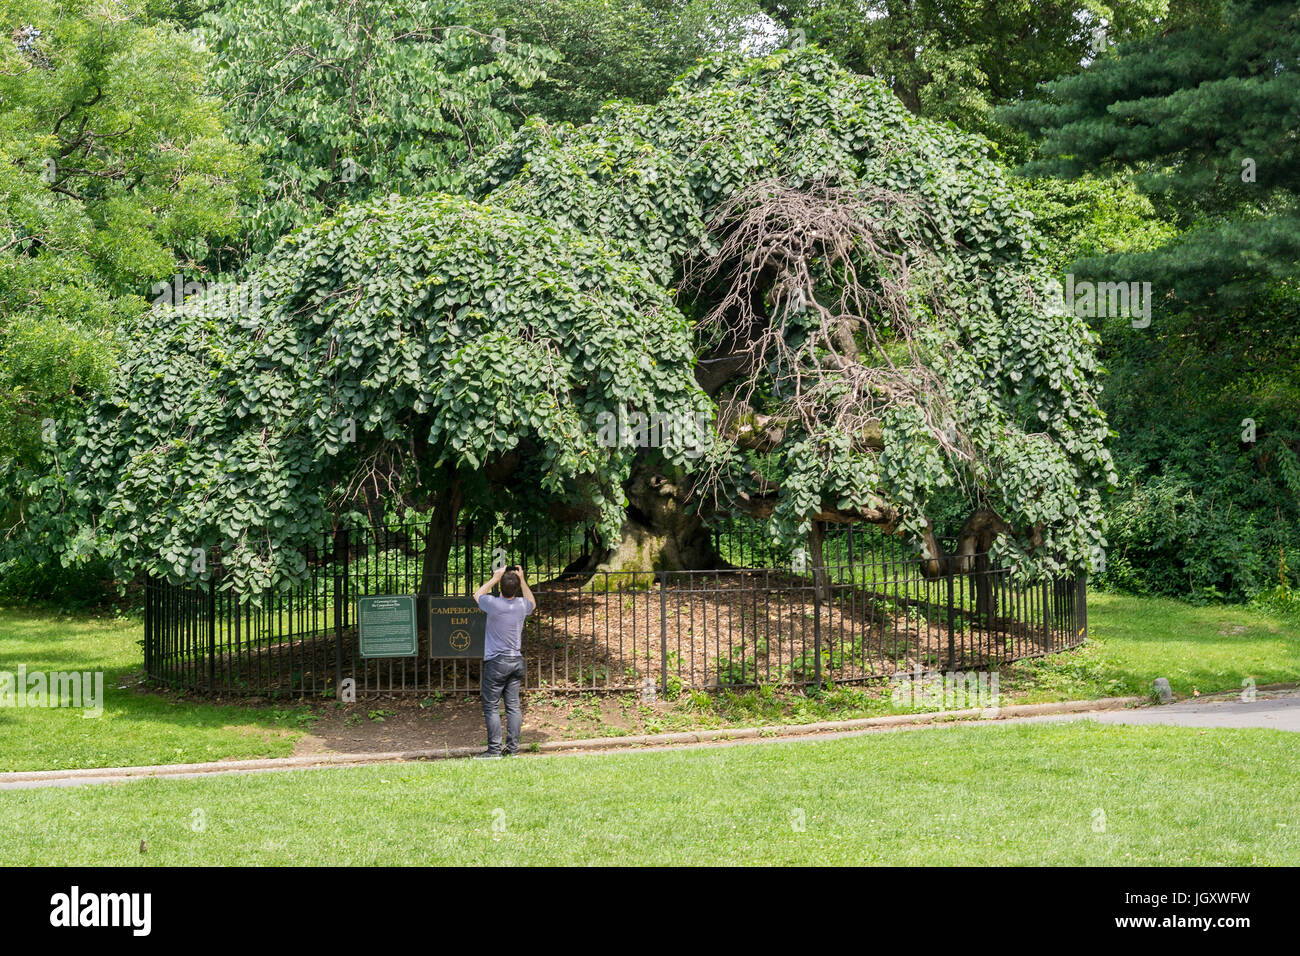 The Camperdown Elm tree in Prospect park in Brooklyn in New York on Saturday, July 8, 2017. The tree was planted in the park in 1872 and is  one of the first camperdown elms planted in the United State. The trees originated on the estate of the Earl of Camperdown in Scotland.(© Richard B. Levine) Stock Photo